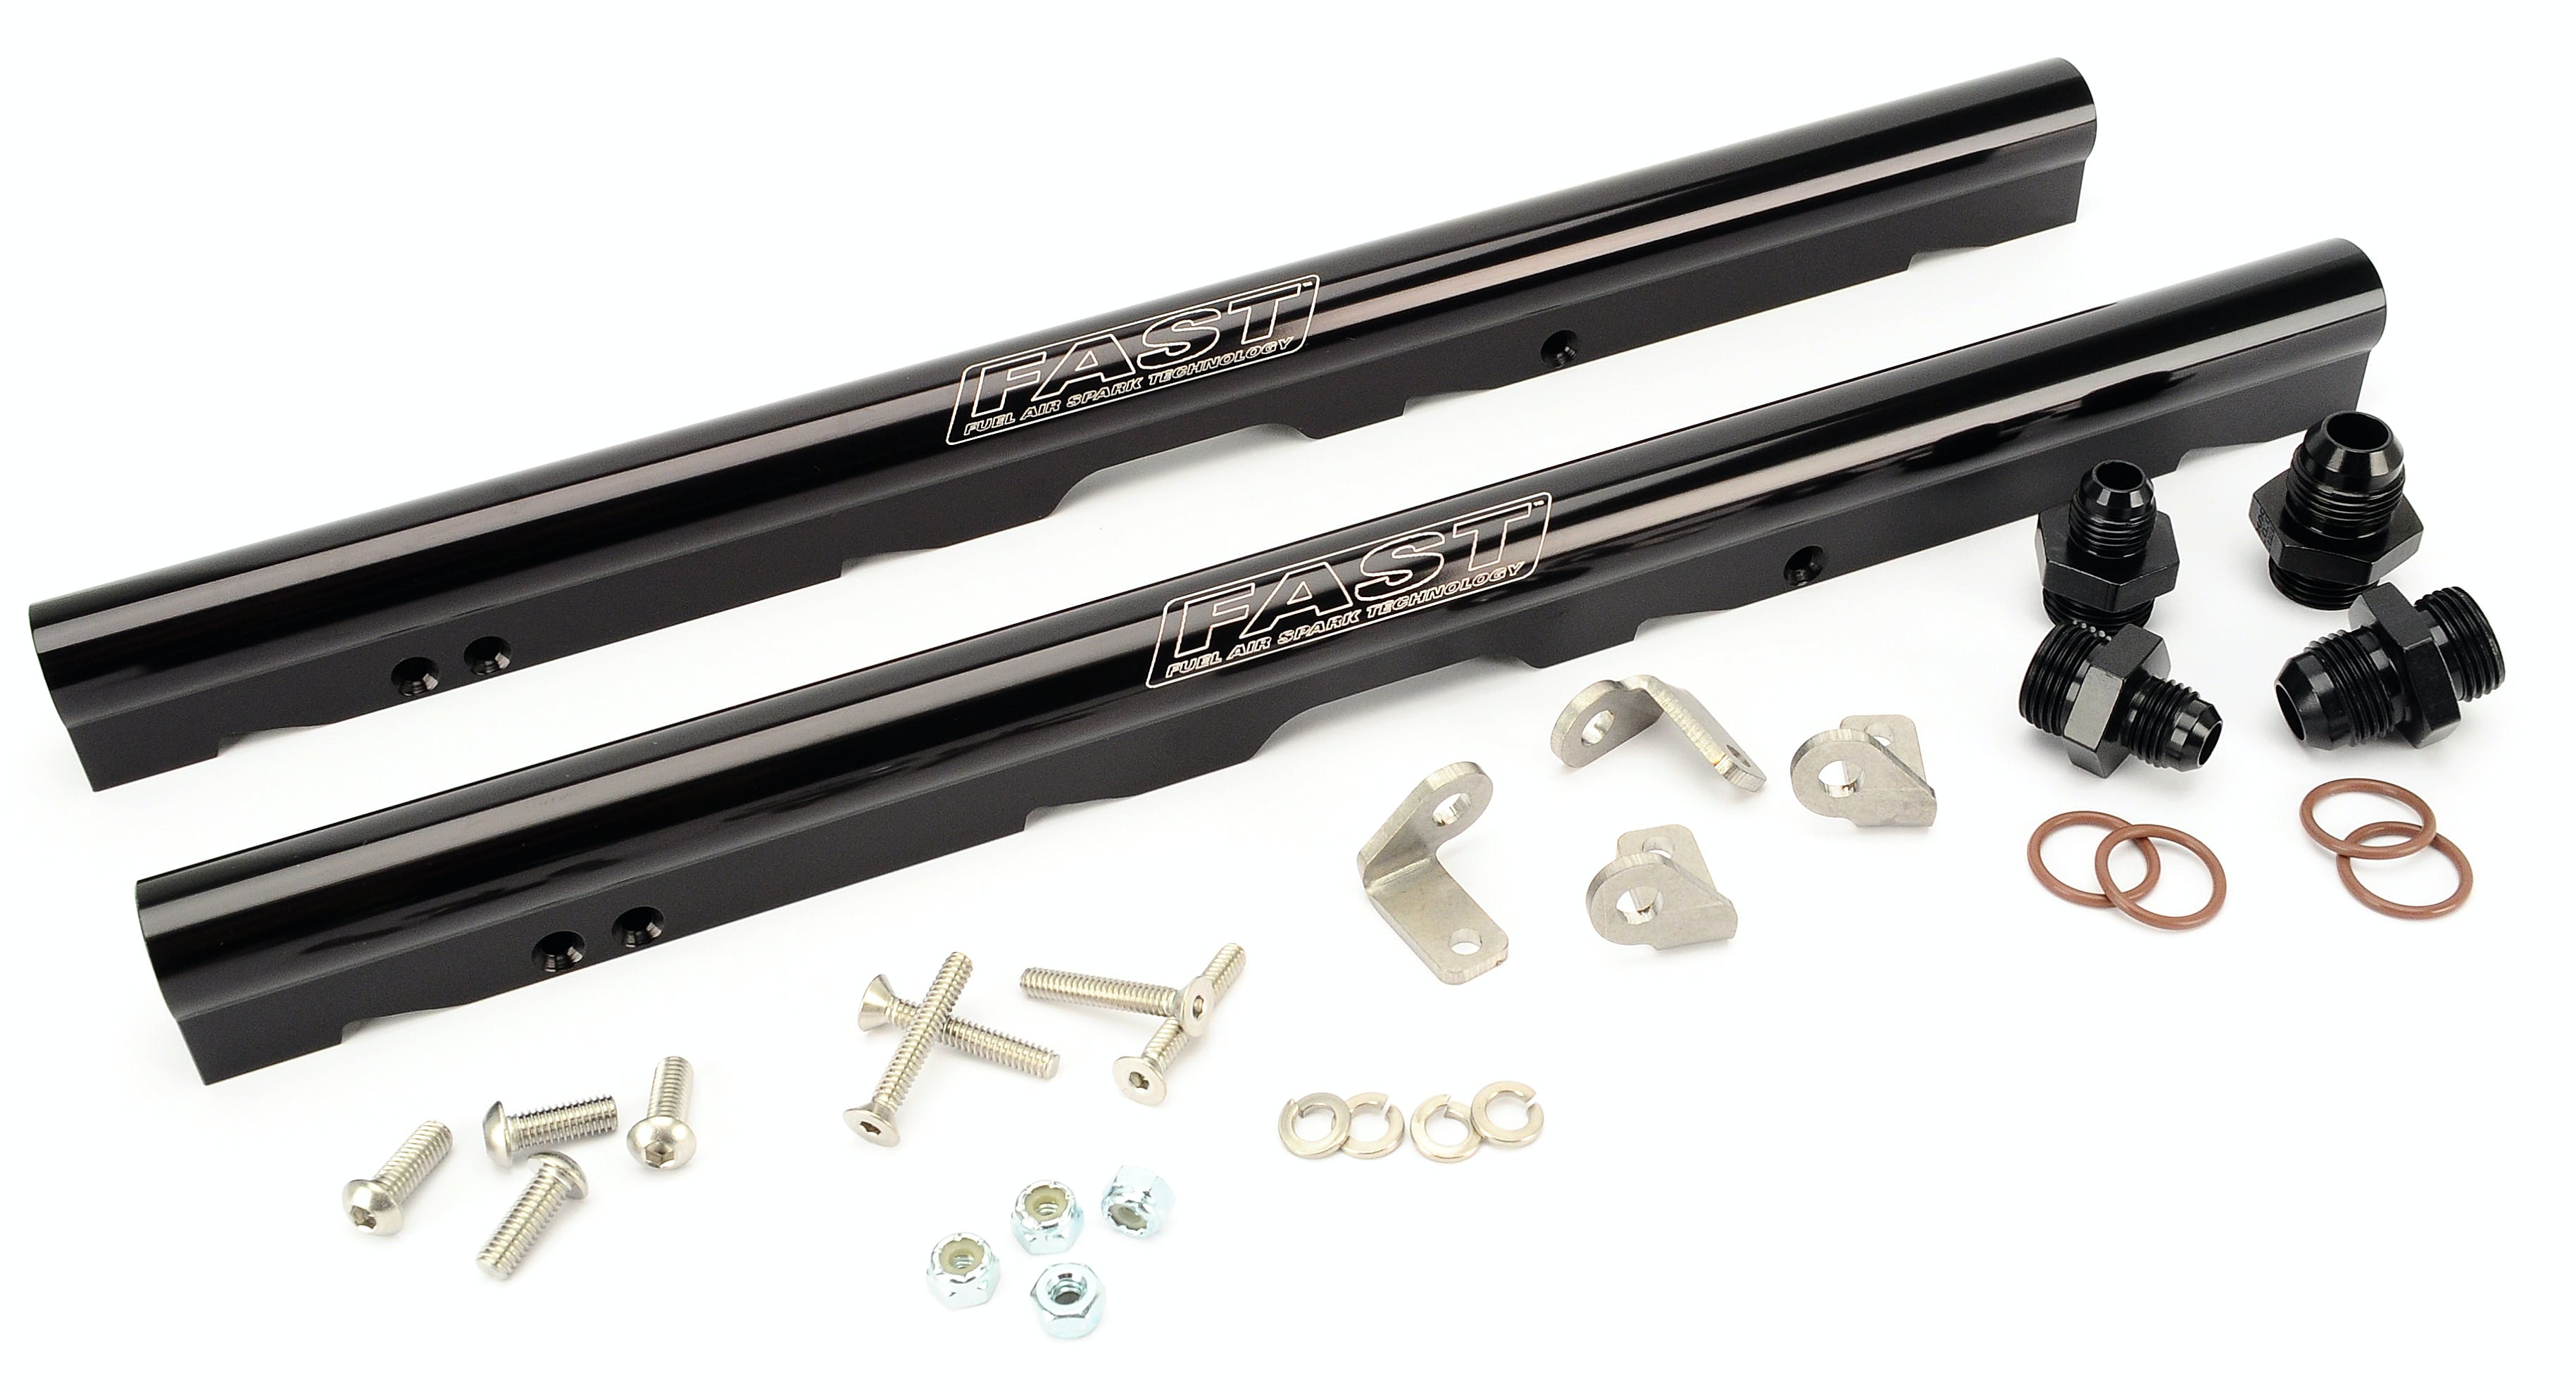 FAST - Fuel Air Spark Technology 146032B-KIT Fuel Injection Fuel Rail